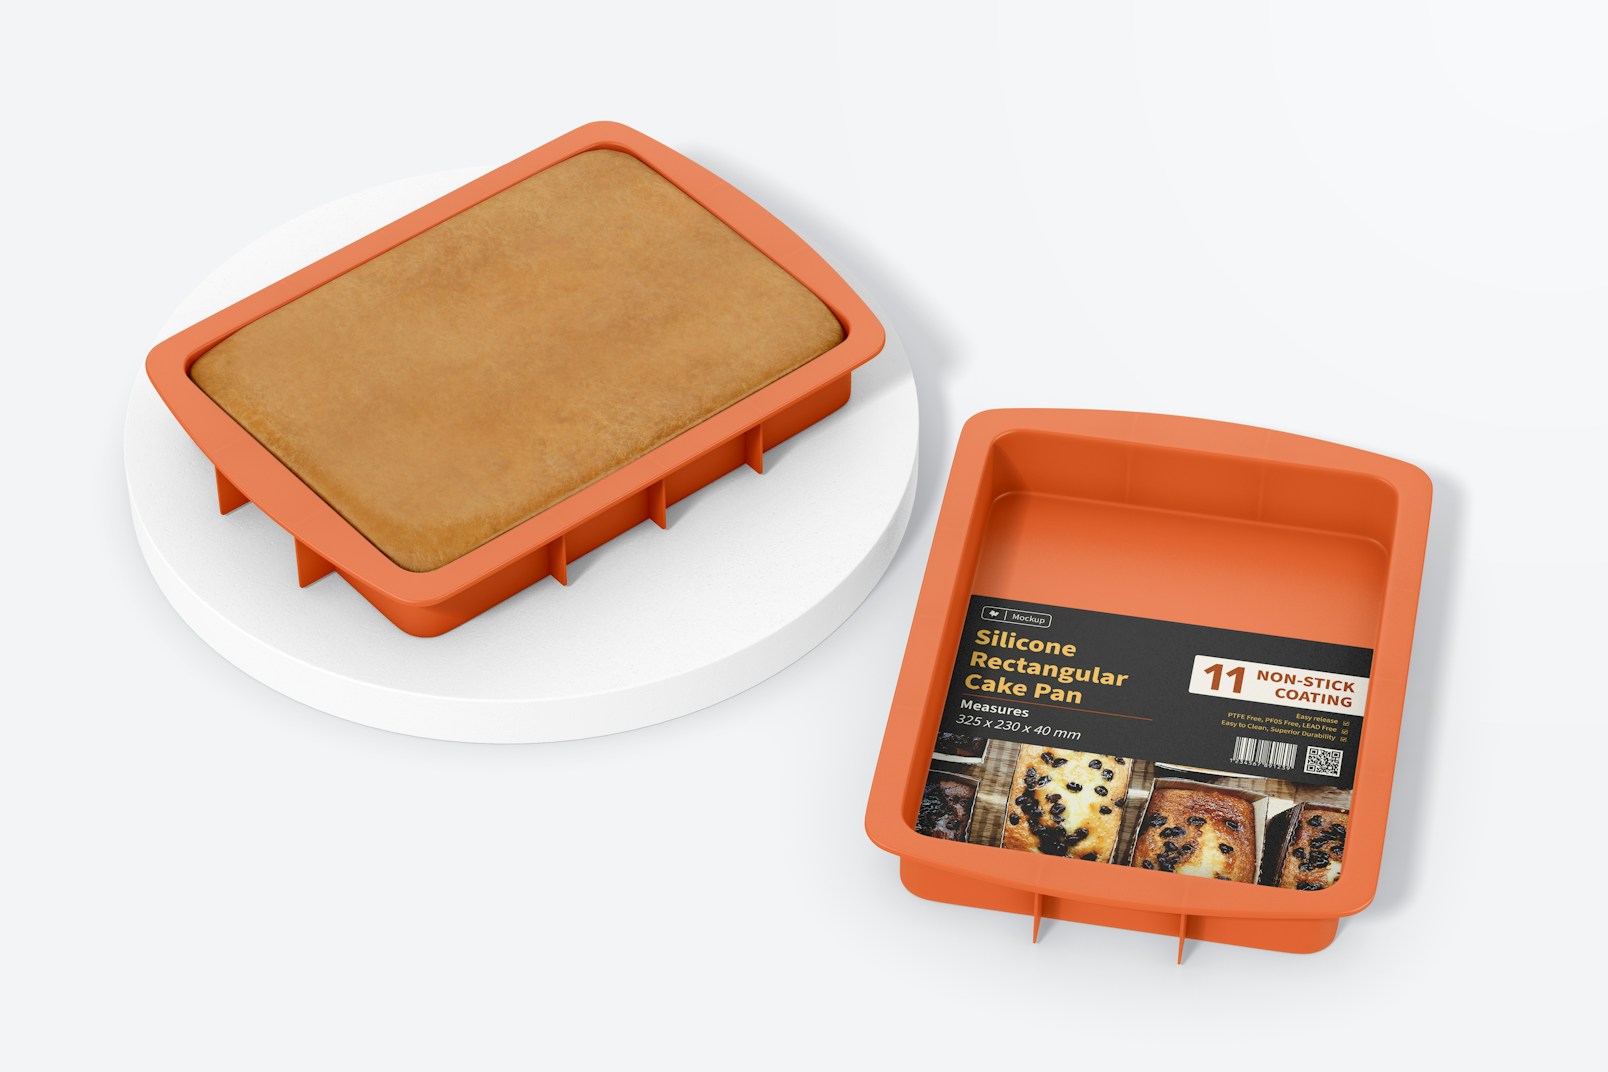 Silicone Rectangular Cake Pans Mockup, Up and Down